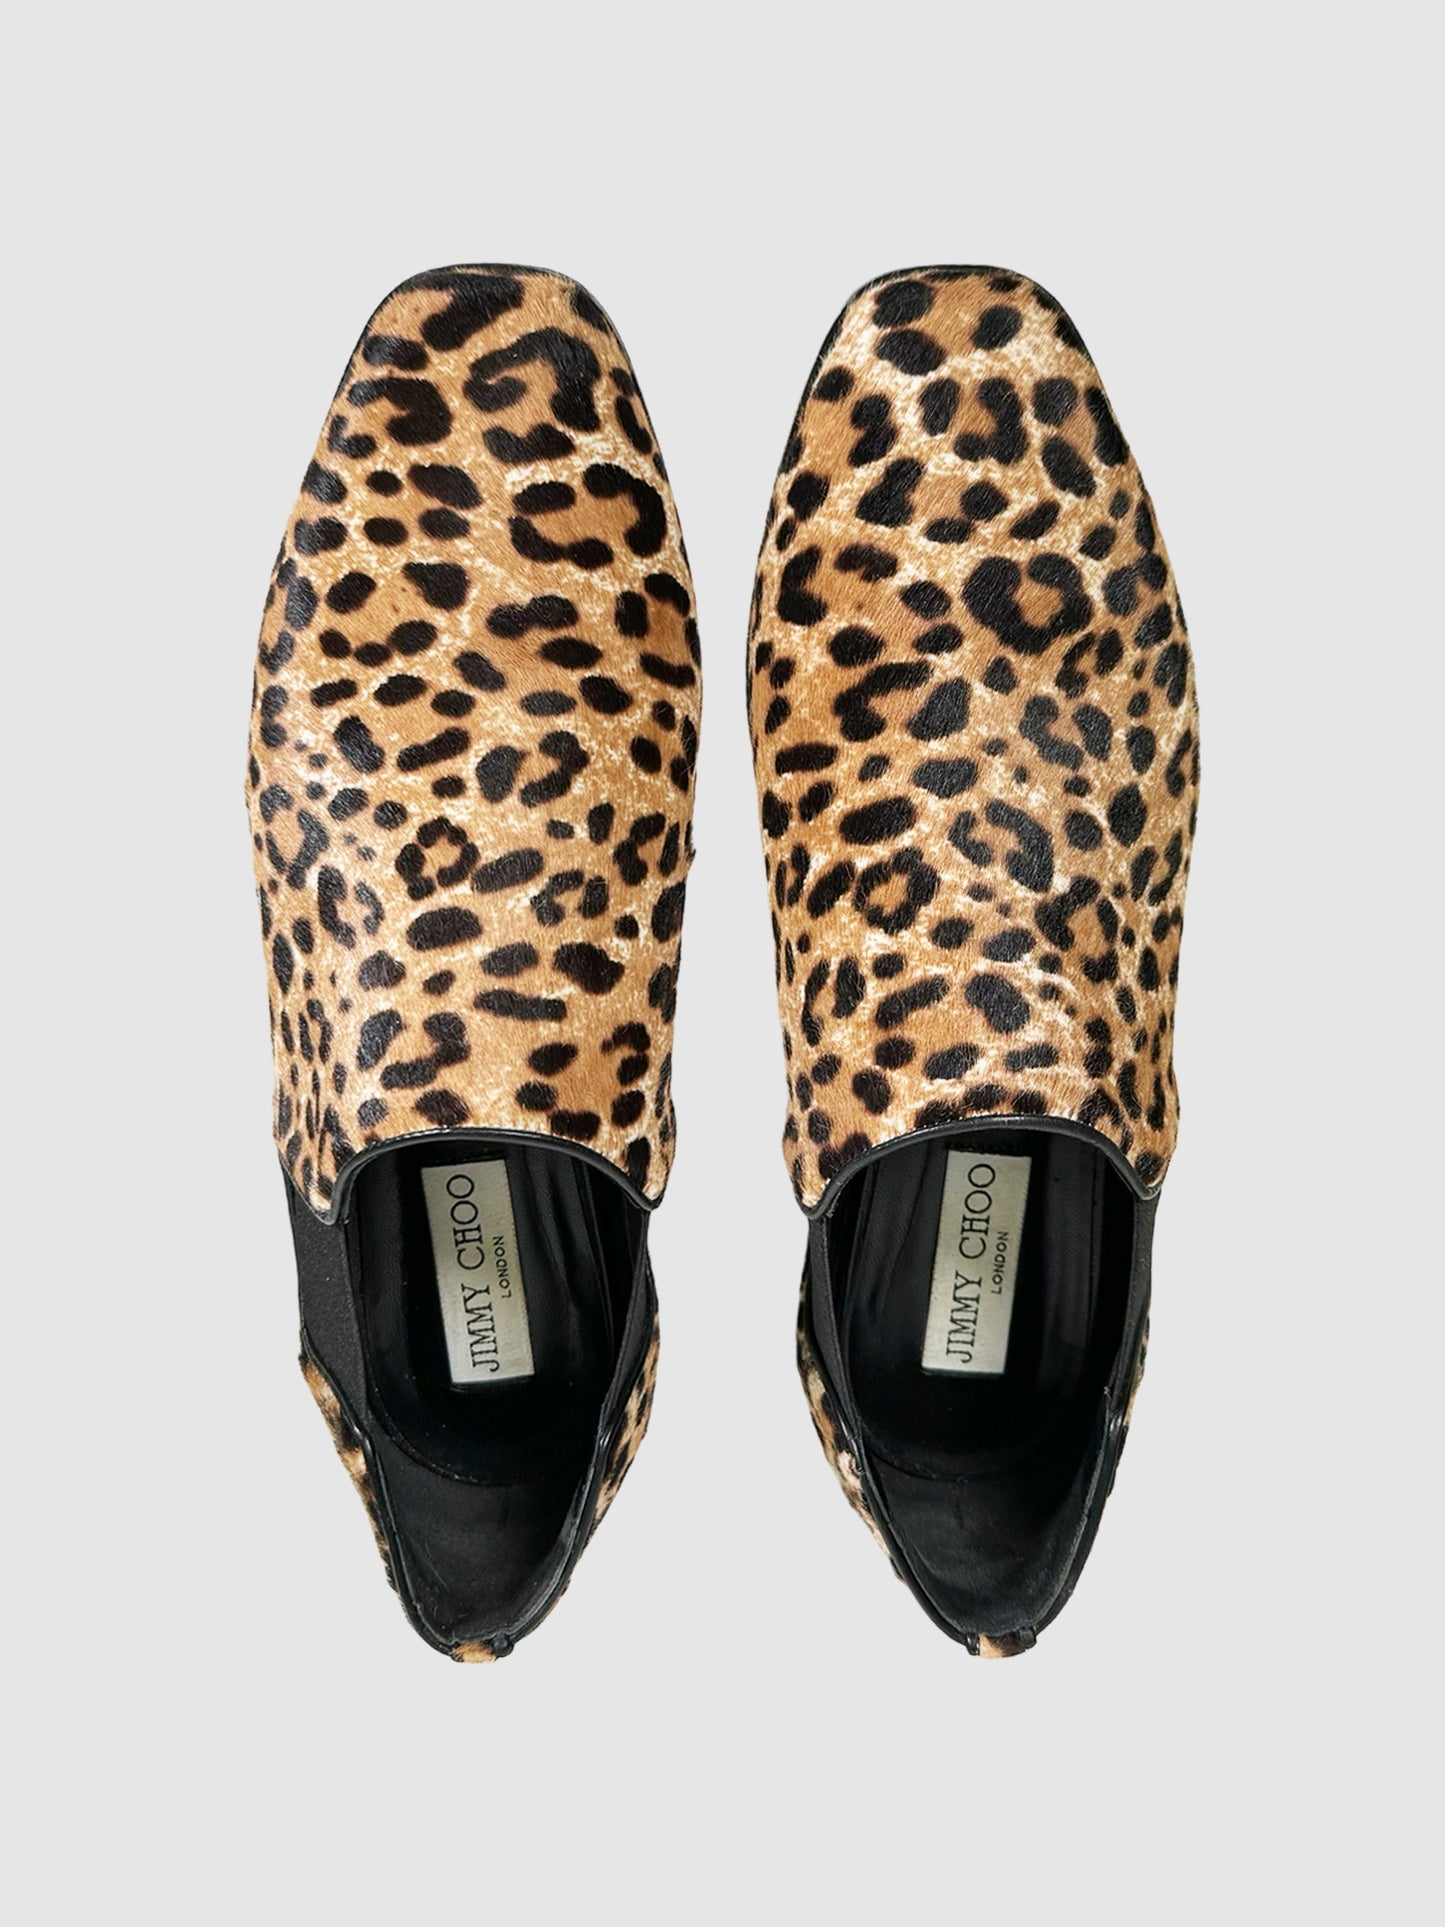 Leopard Print Loafers - Size 39